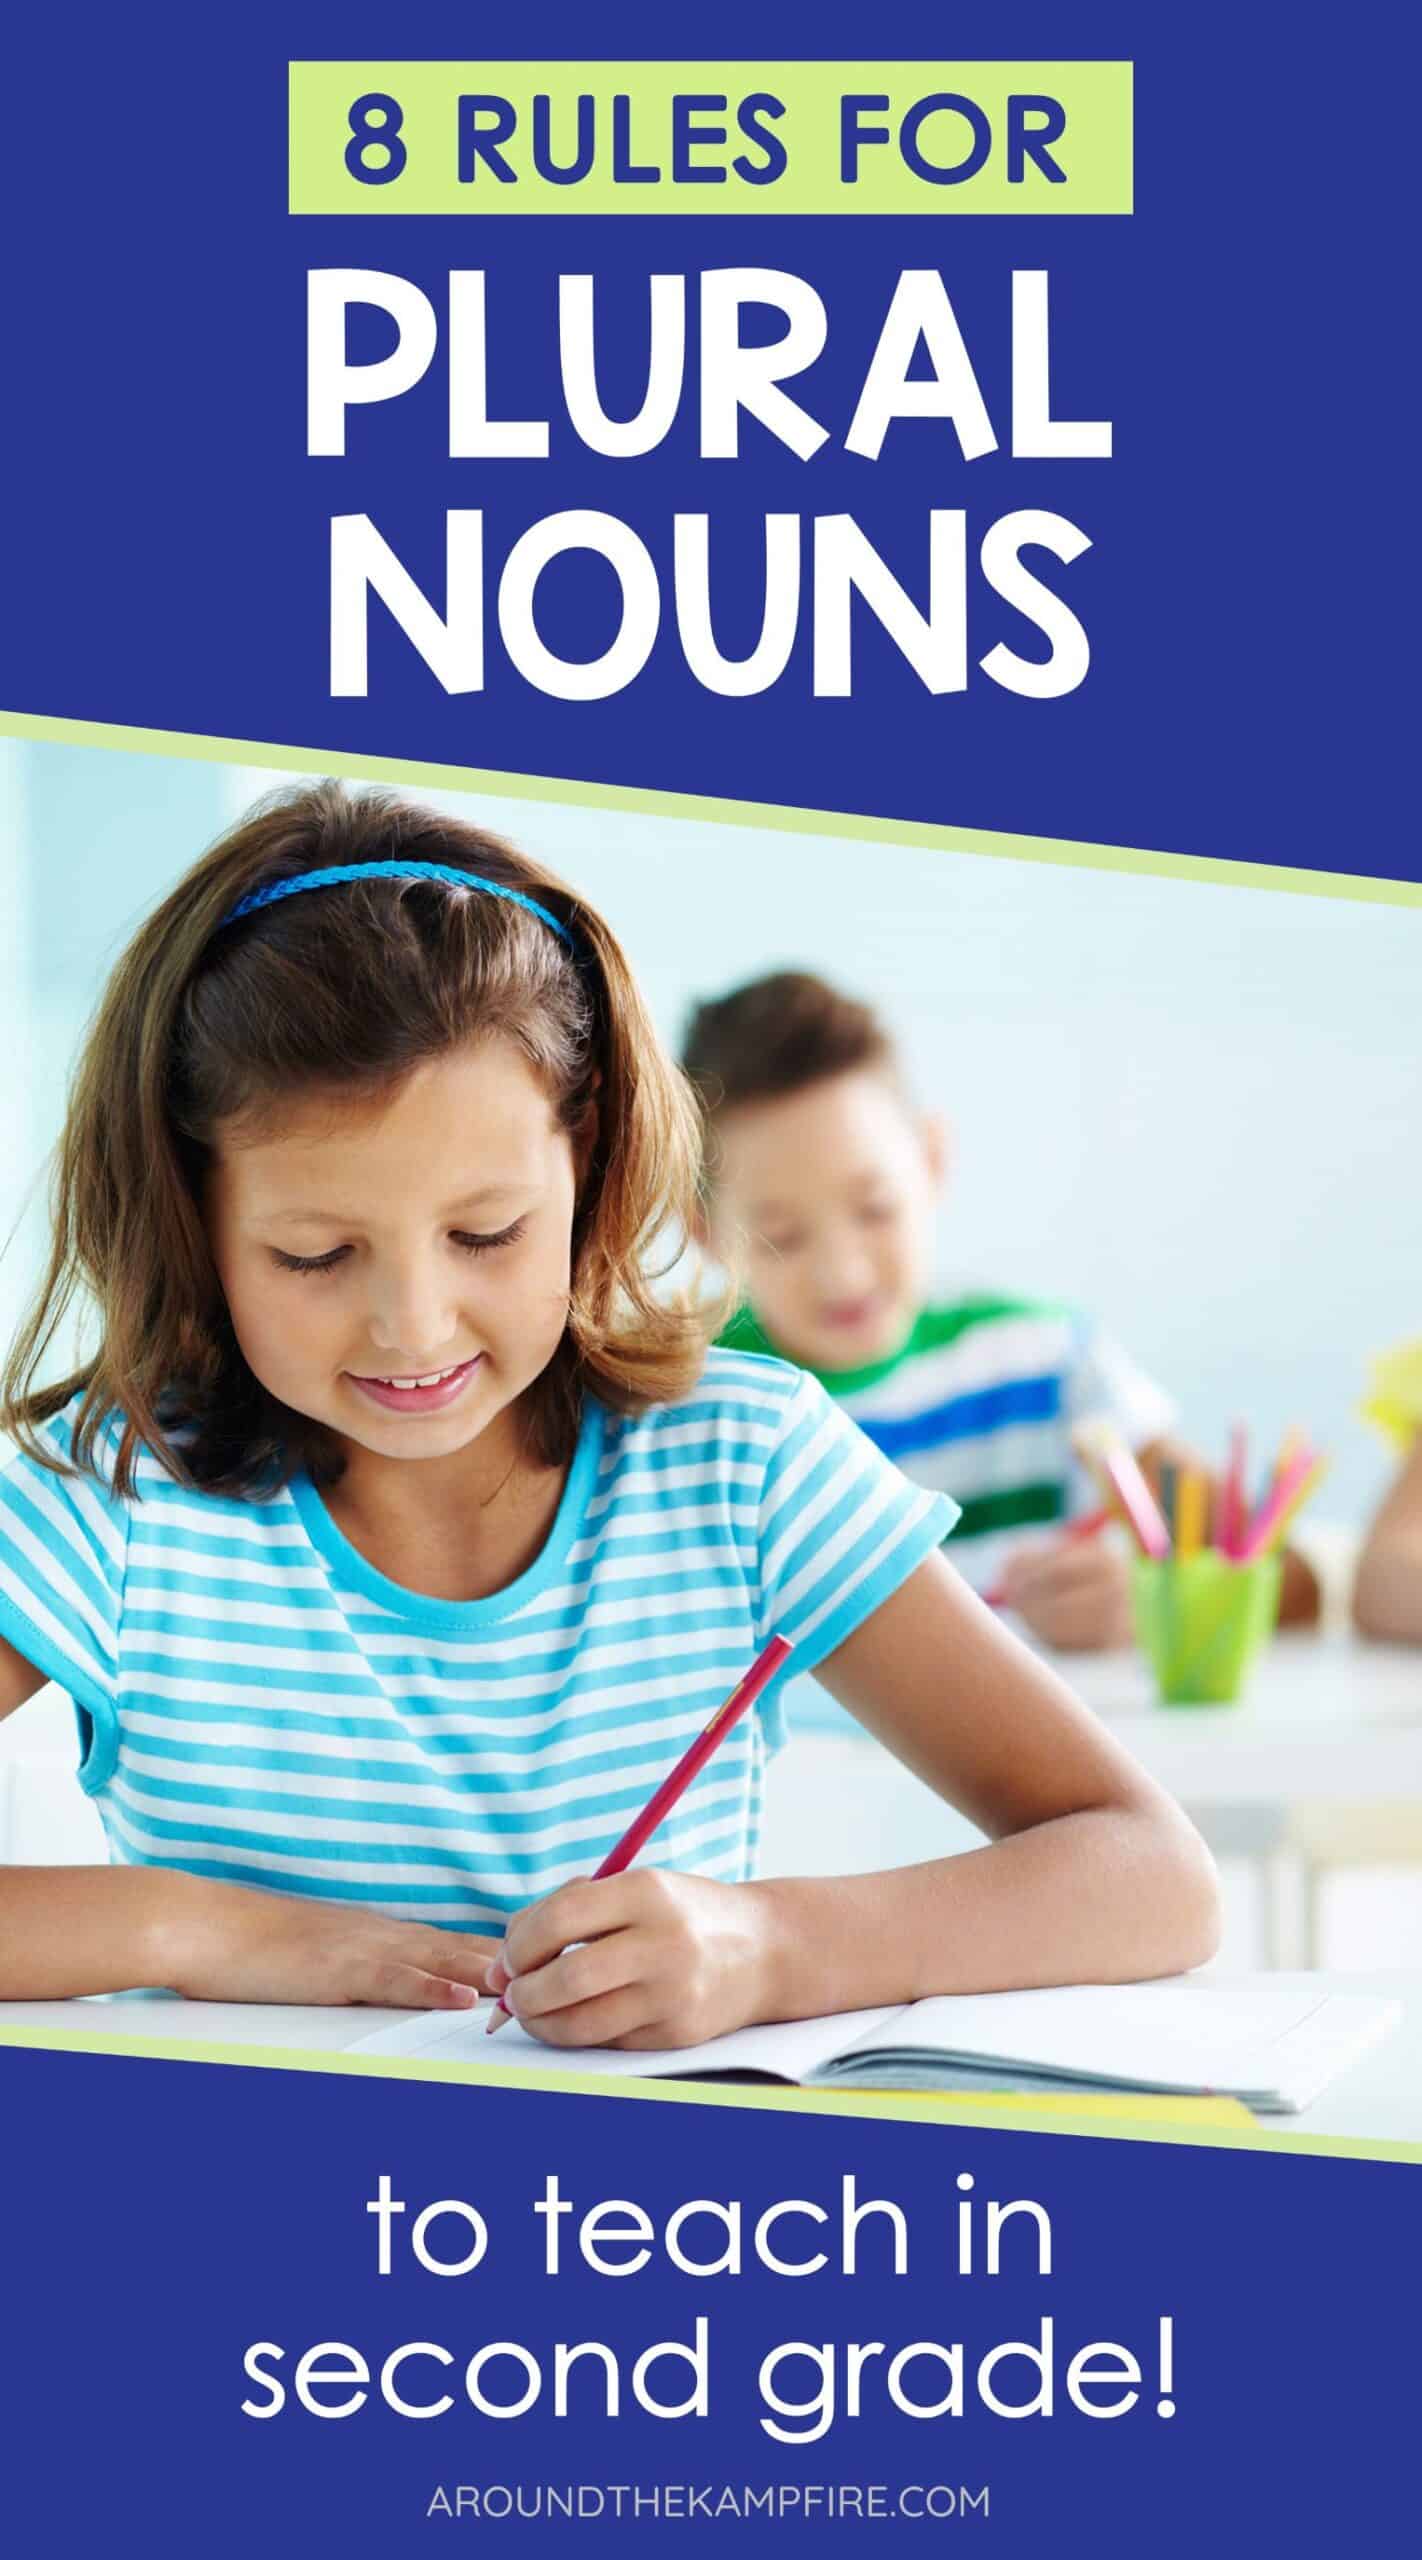 Article listing plural noun rules to teach in second grade.